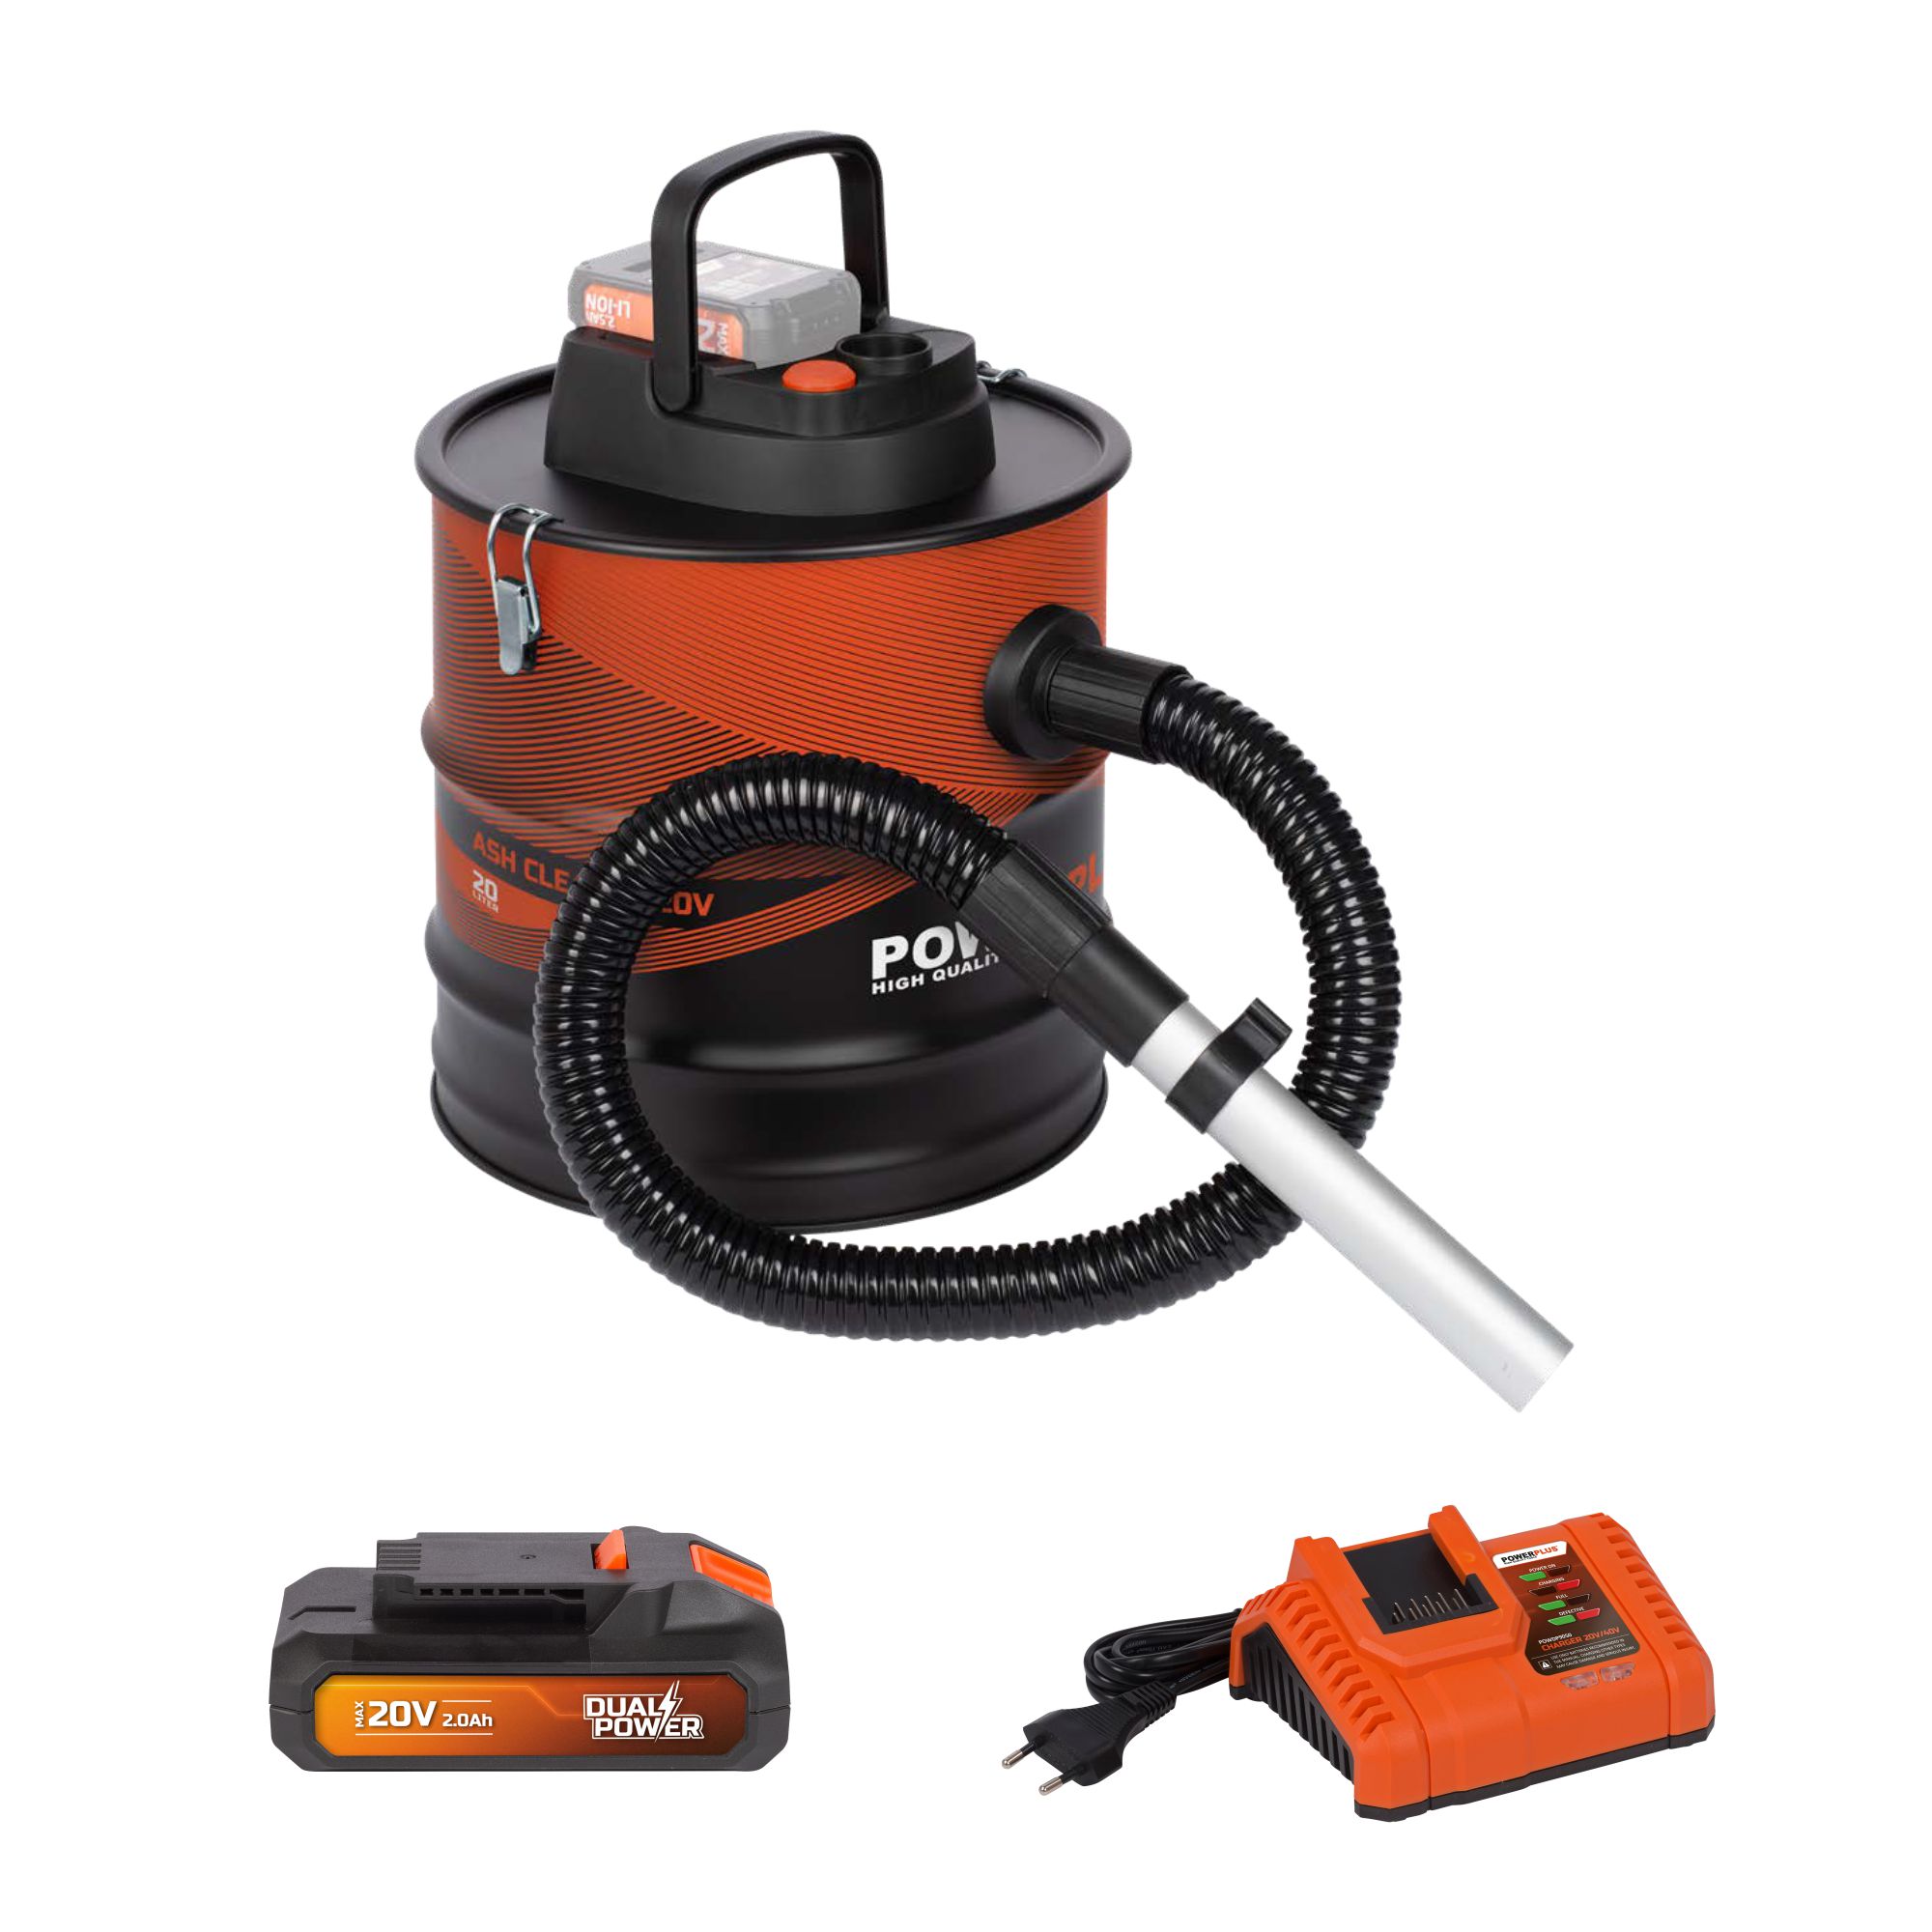 Dual Power 20V Ash Cleaner Combo